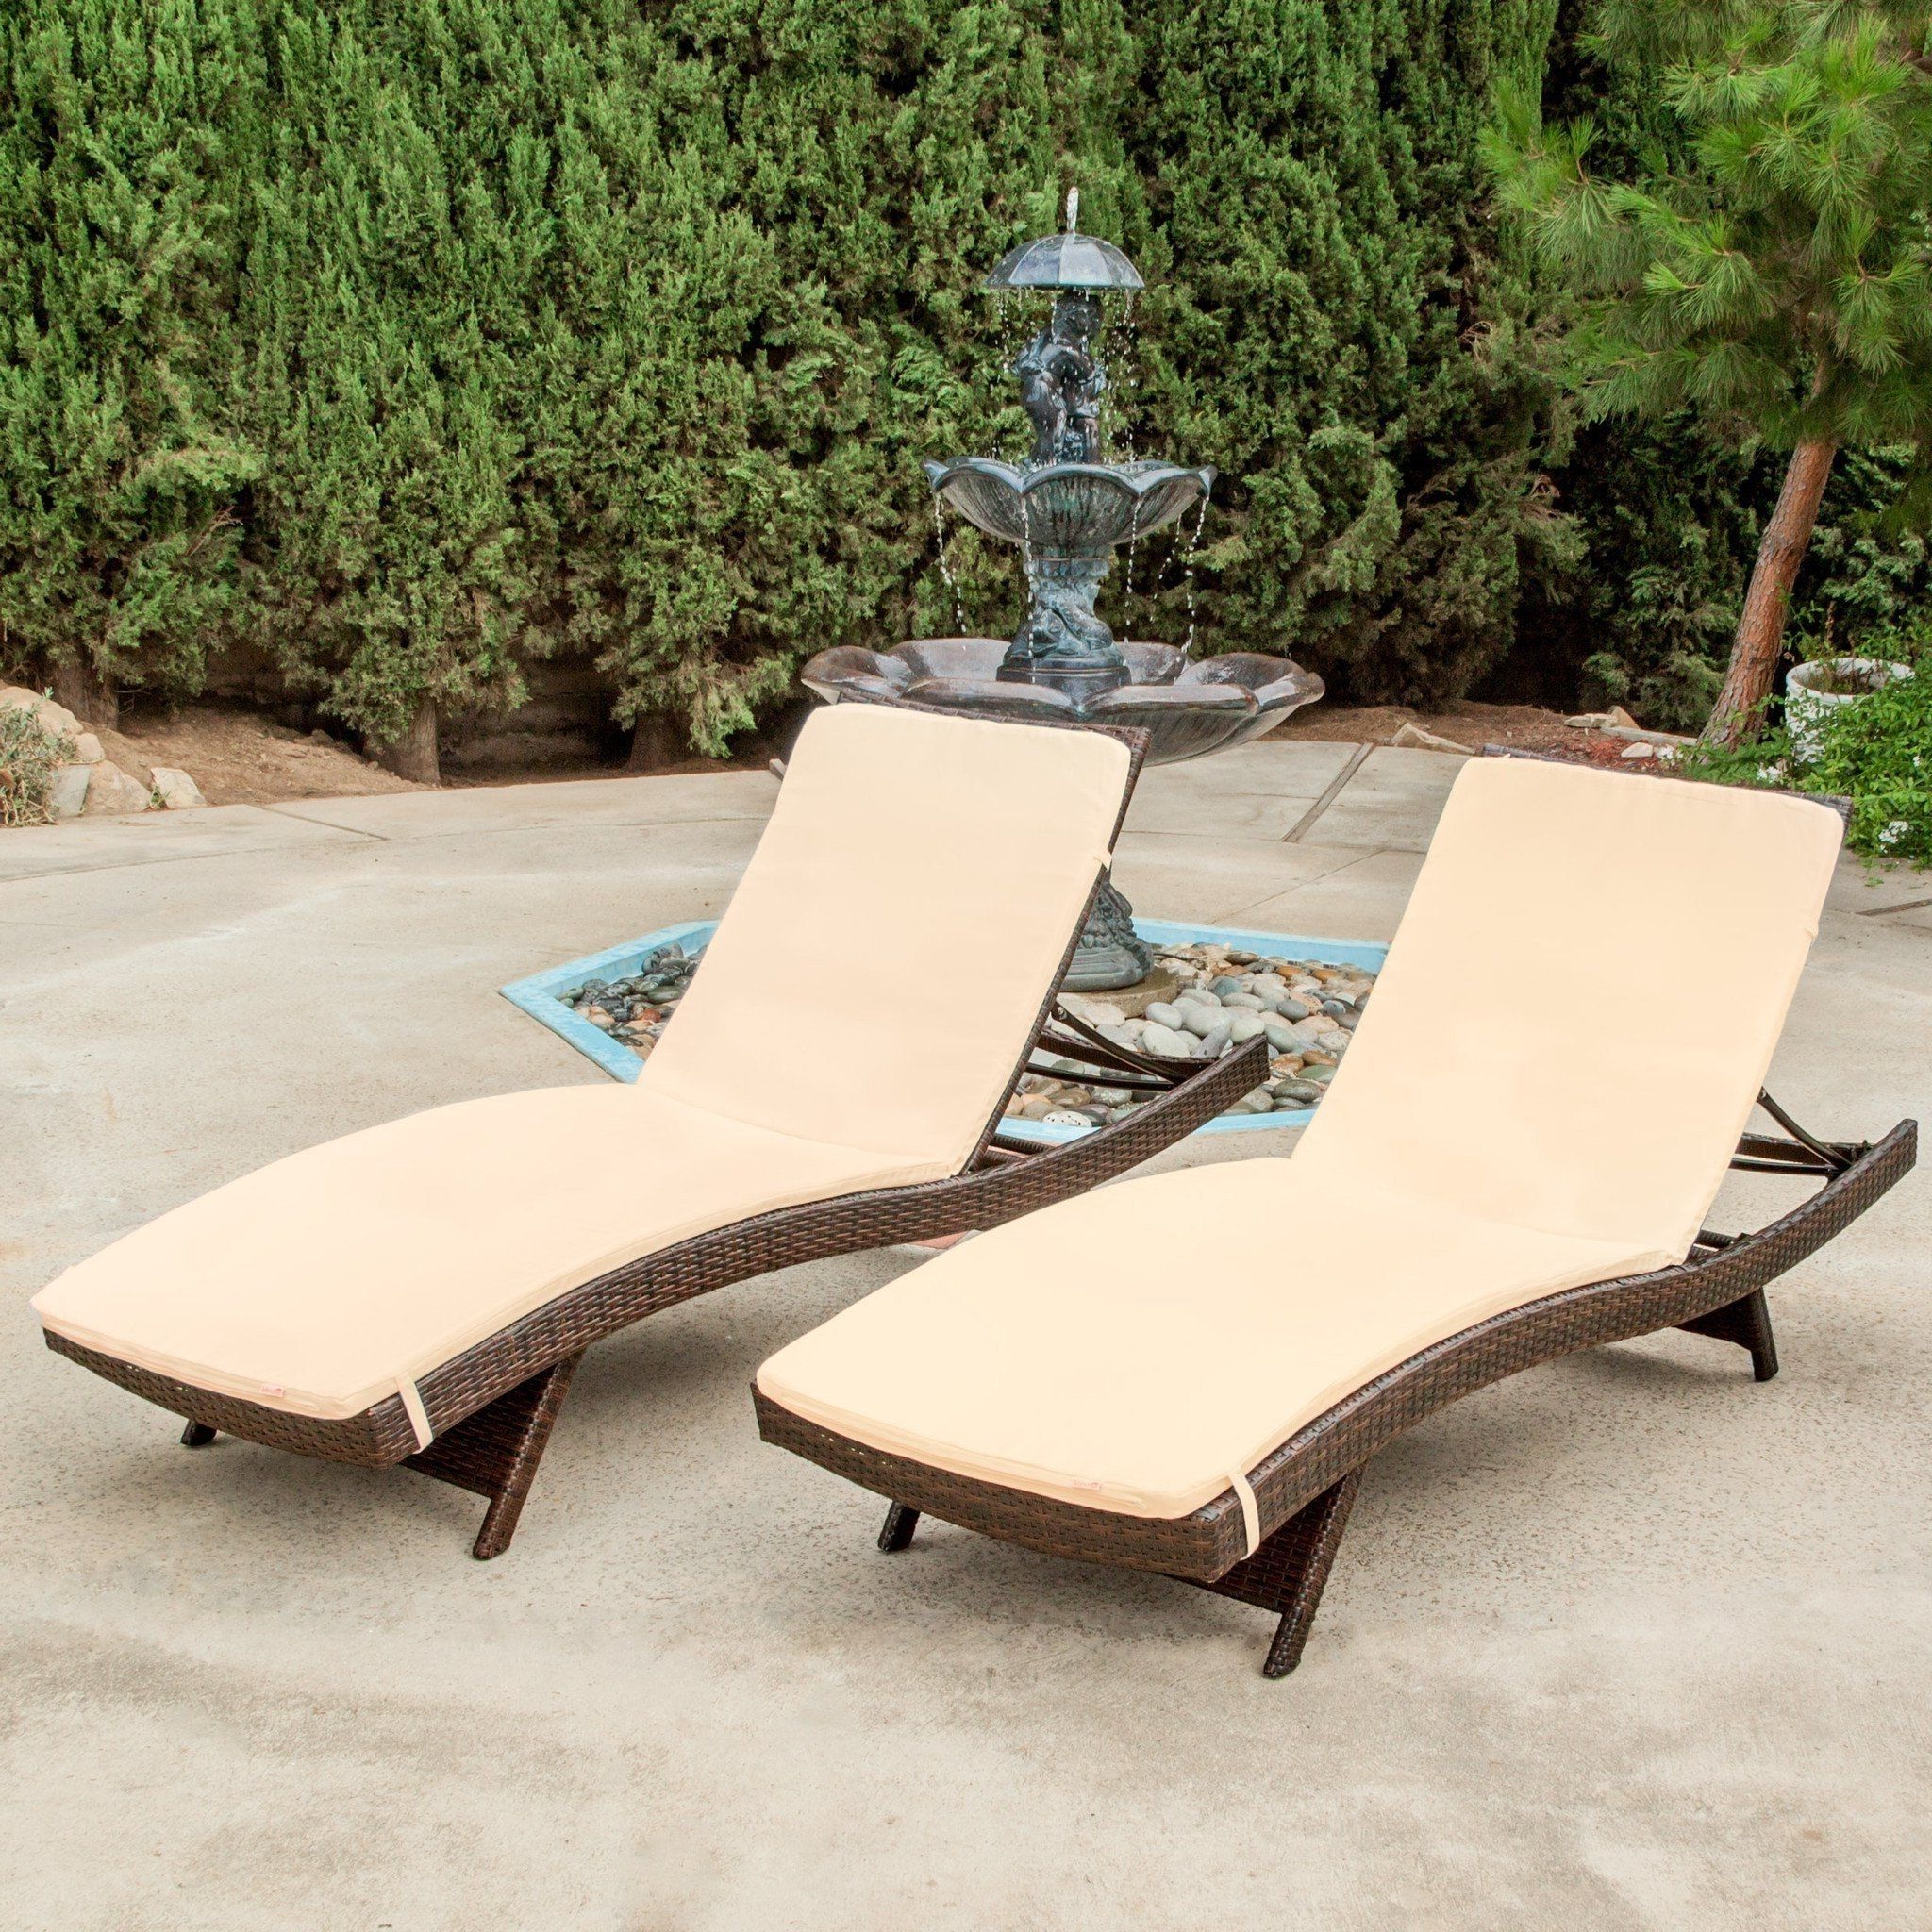 Most Recently Released Lakeport Outdoor Adjustable Chaise Lounge Chairs Inside Lakeport Outdoor Adjustable Chaise Lounge Chairs W/ Cushions (set (View 2 of 15)